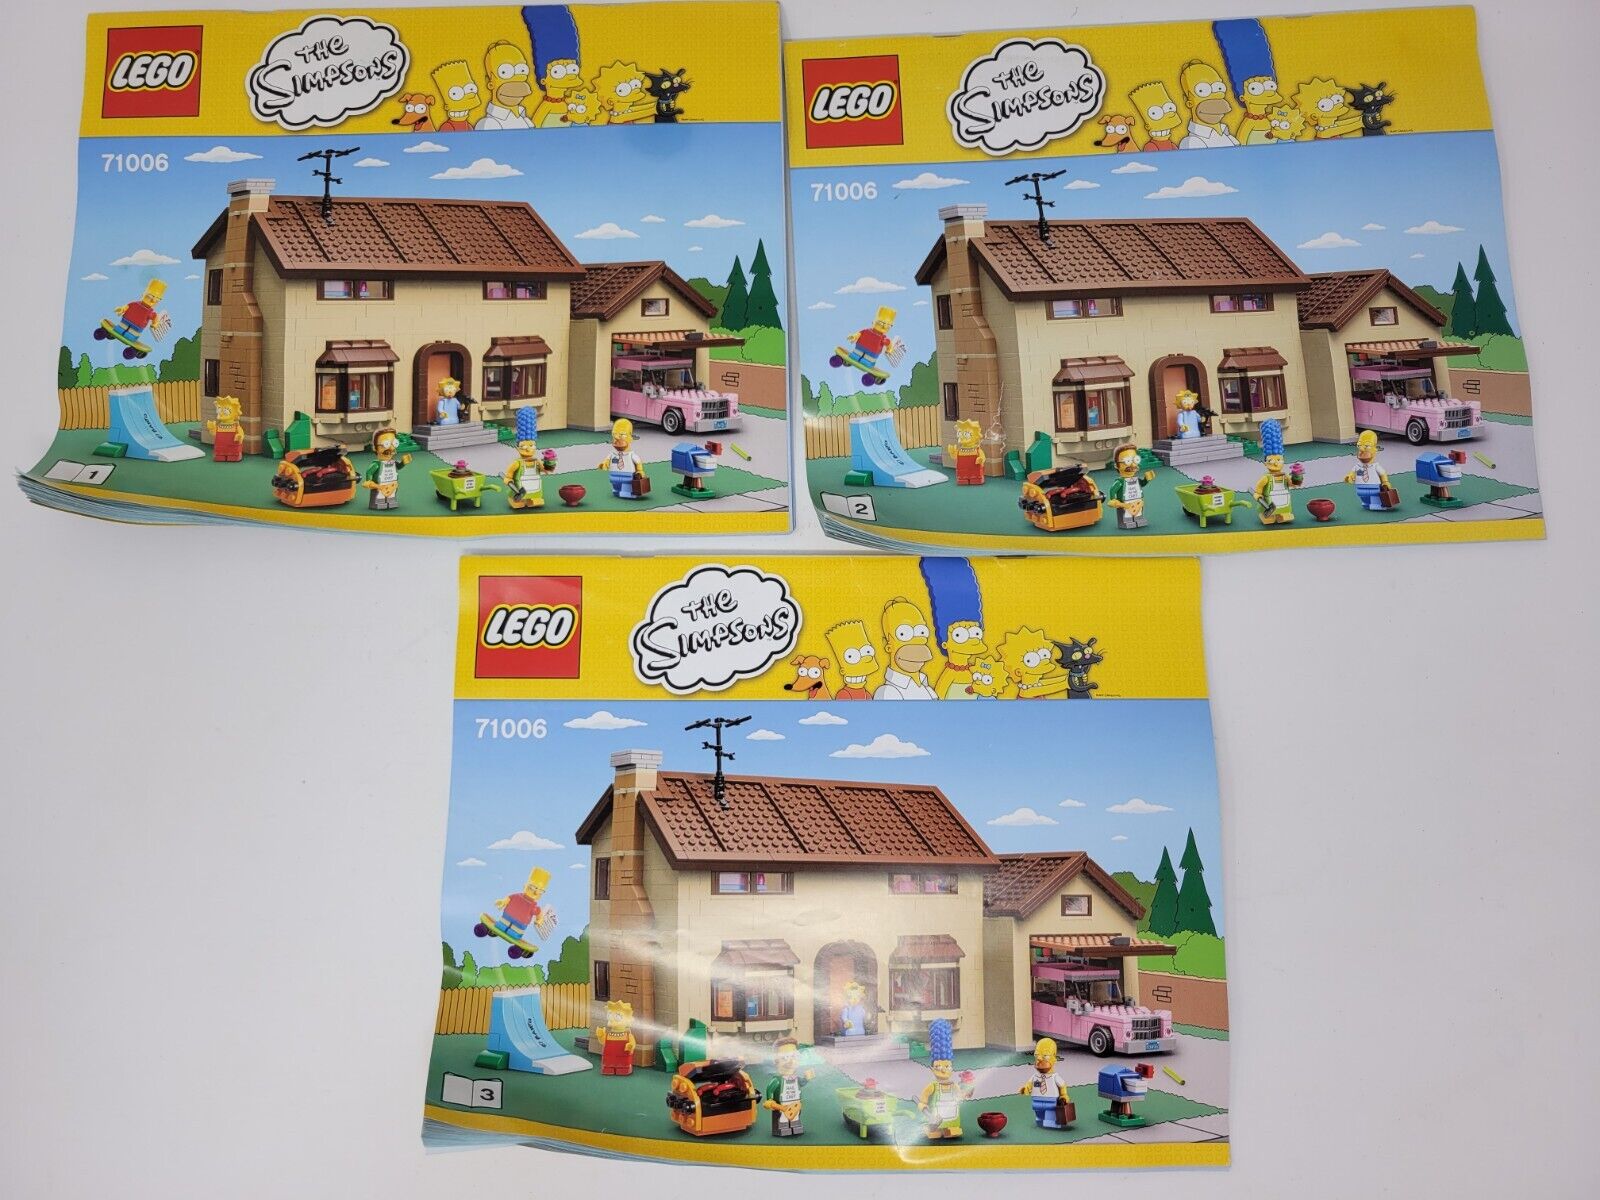 INSTRUCTIONS ONLY FOR LEGO 71006 The Simpson's House No Bricks